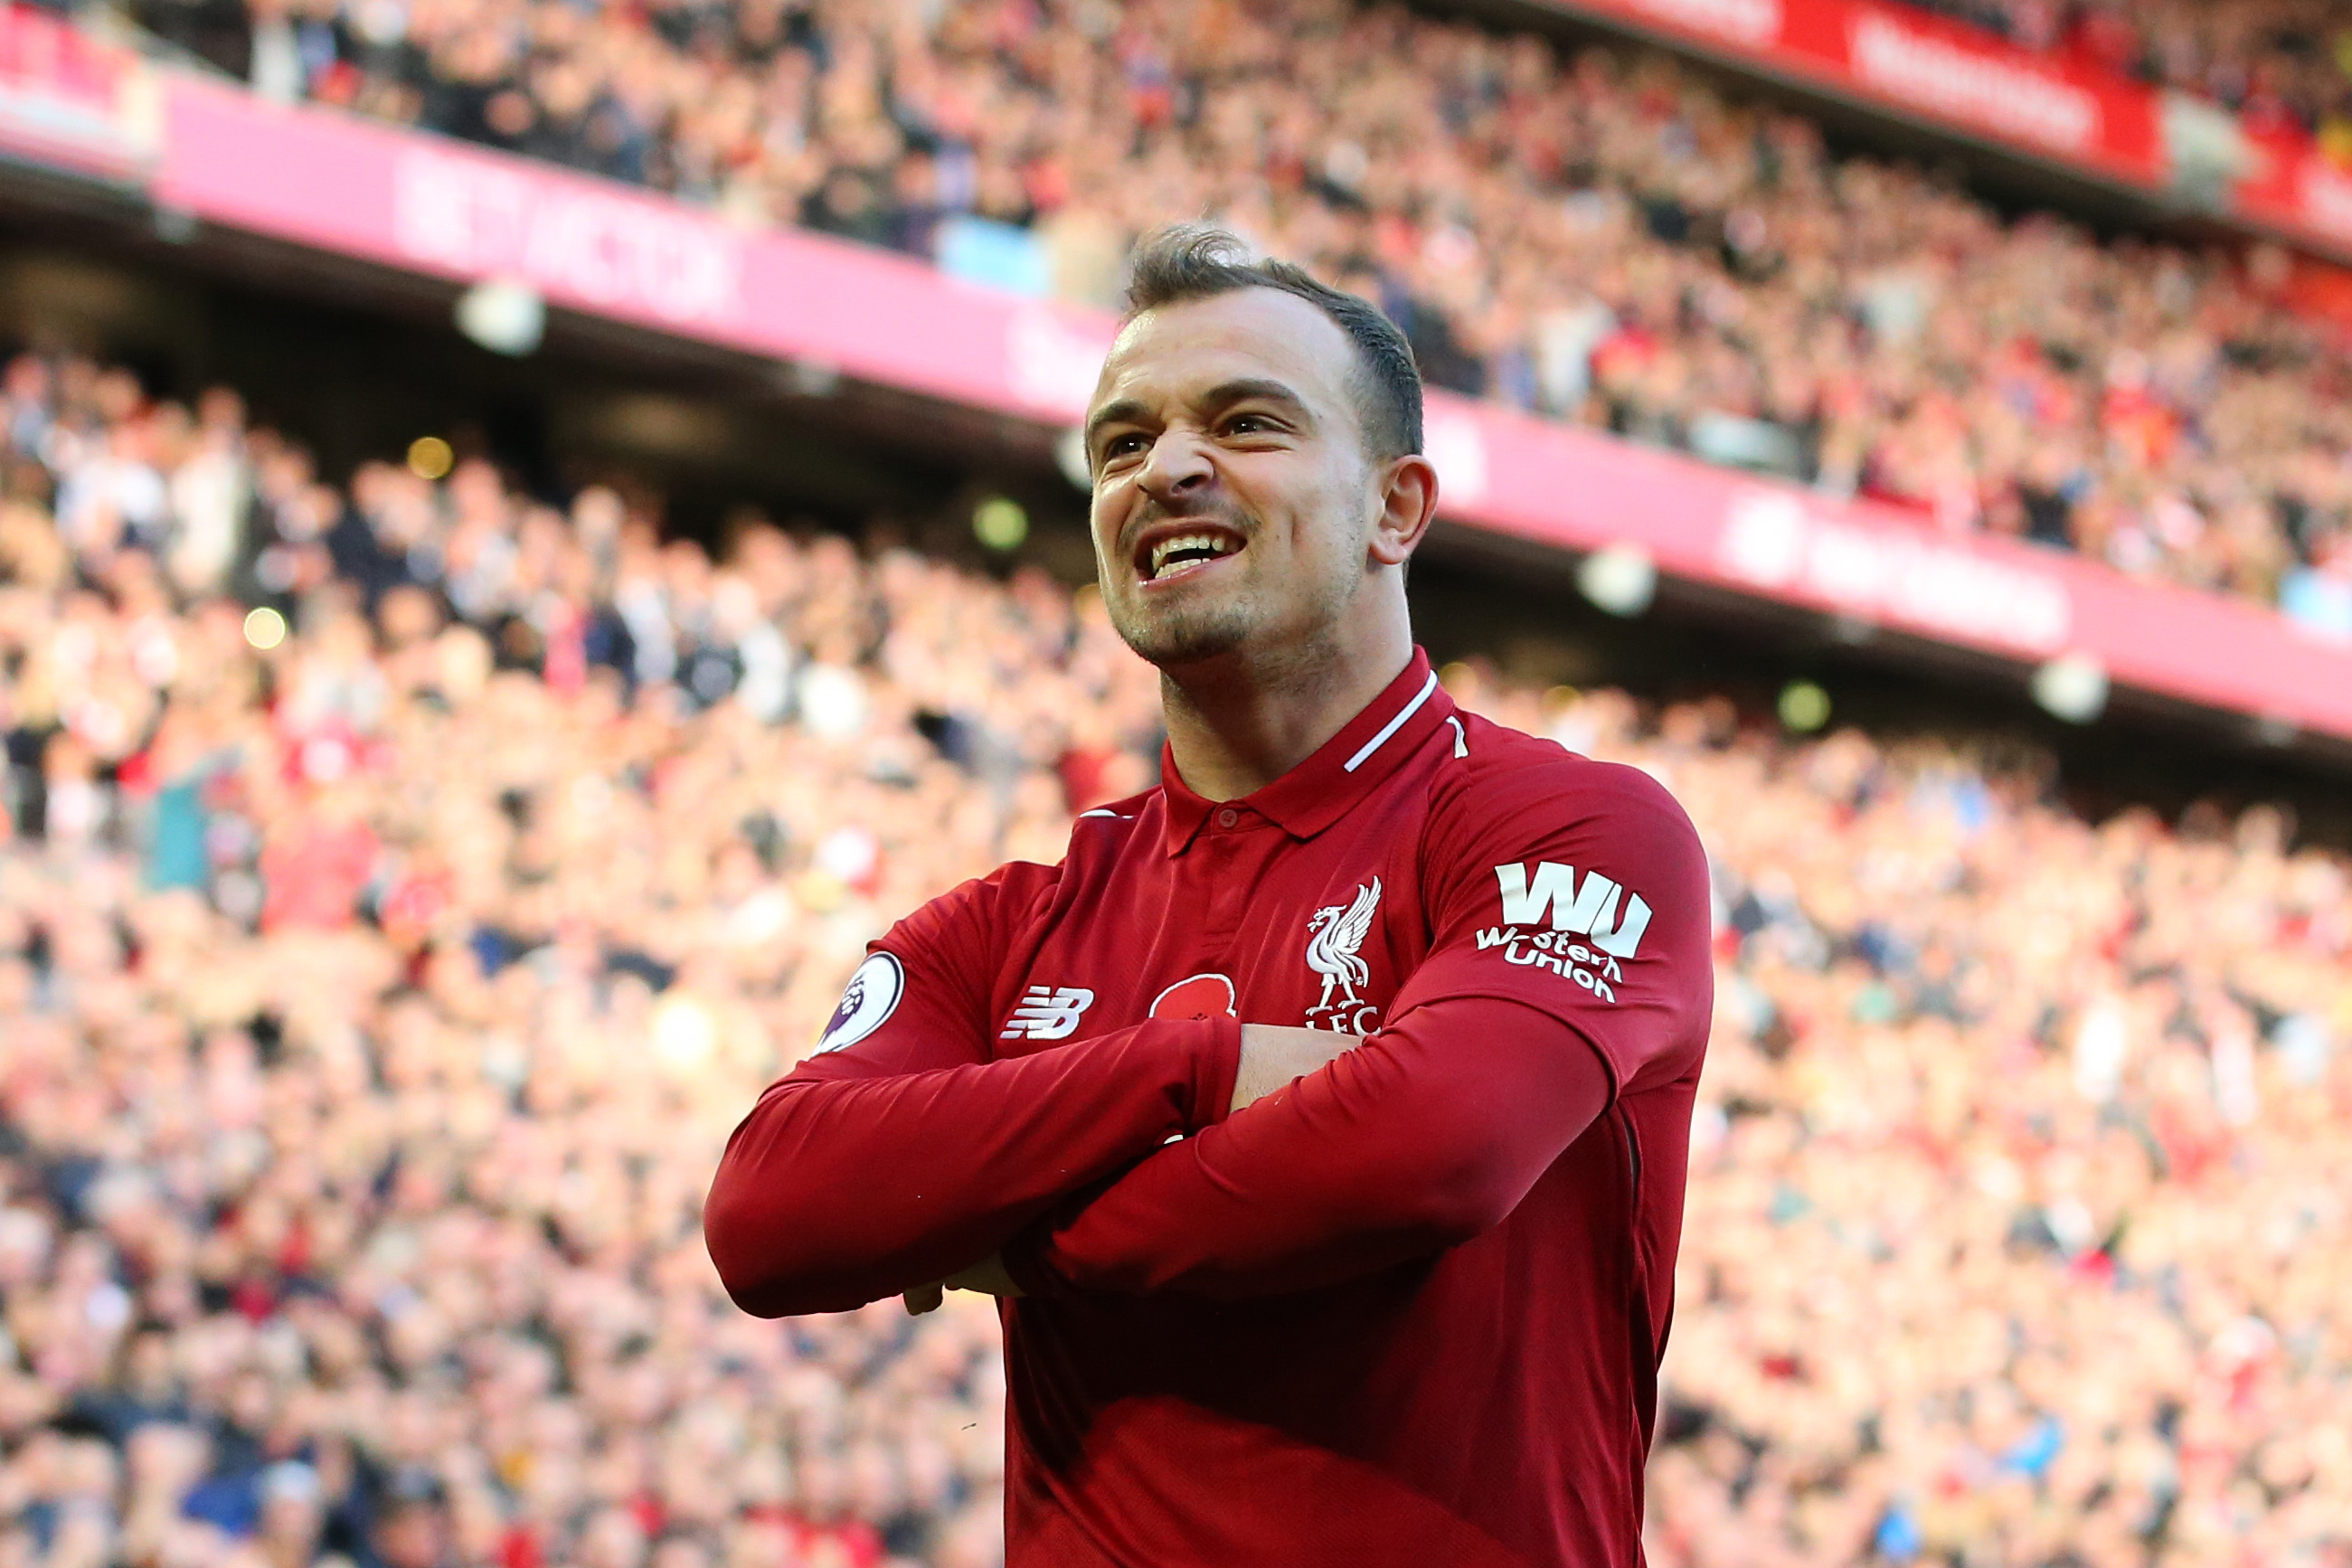 LIVERPOOL, ENGLAND - NOVEMBER 11:  Xherdan Shaqiri of Liverpool celebrates after scoring his team's second goal during the Premier League match between Liverpool FC and Fulham FC at Anfield on November 11, 2018 in Liverpool, United Kingdom.  (Photo by Alex Livesey/Getty Images)